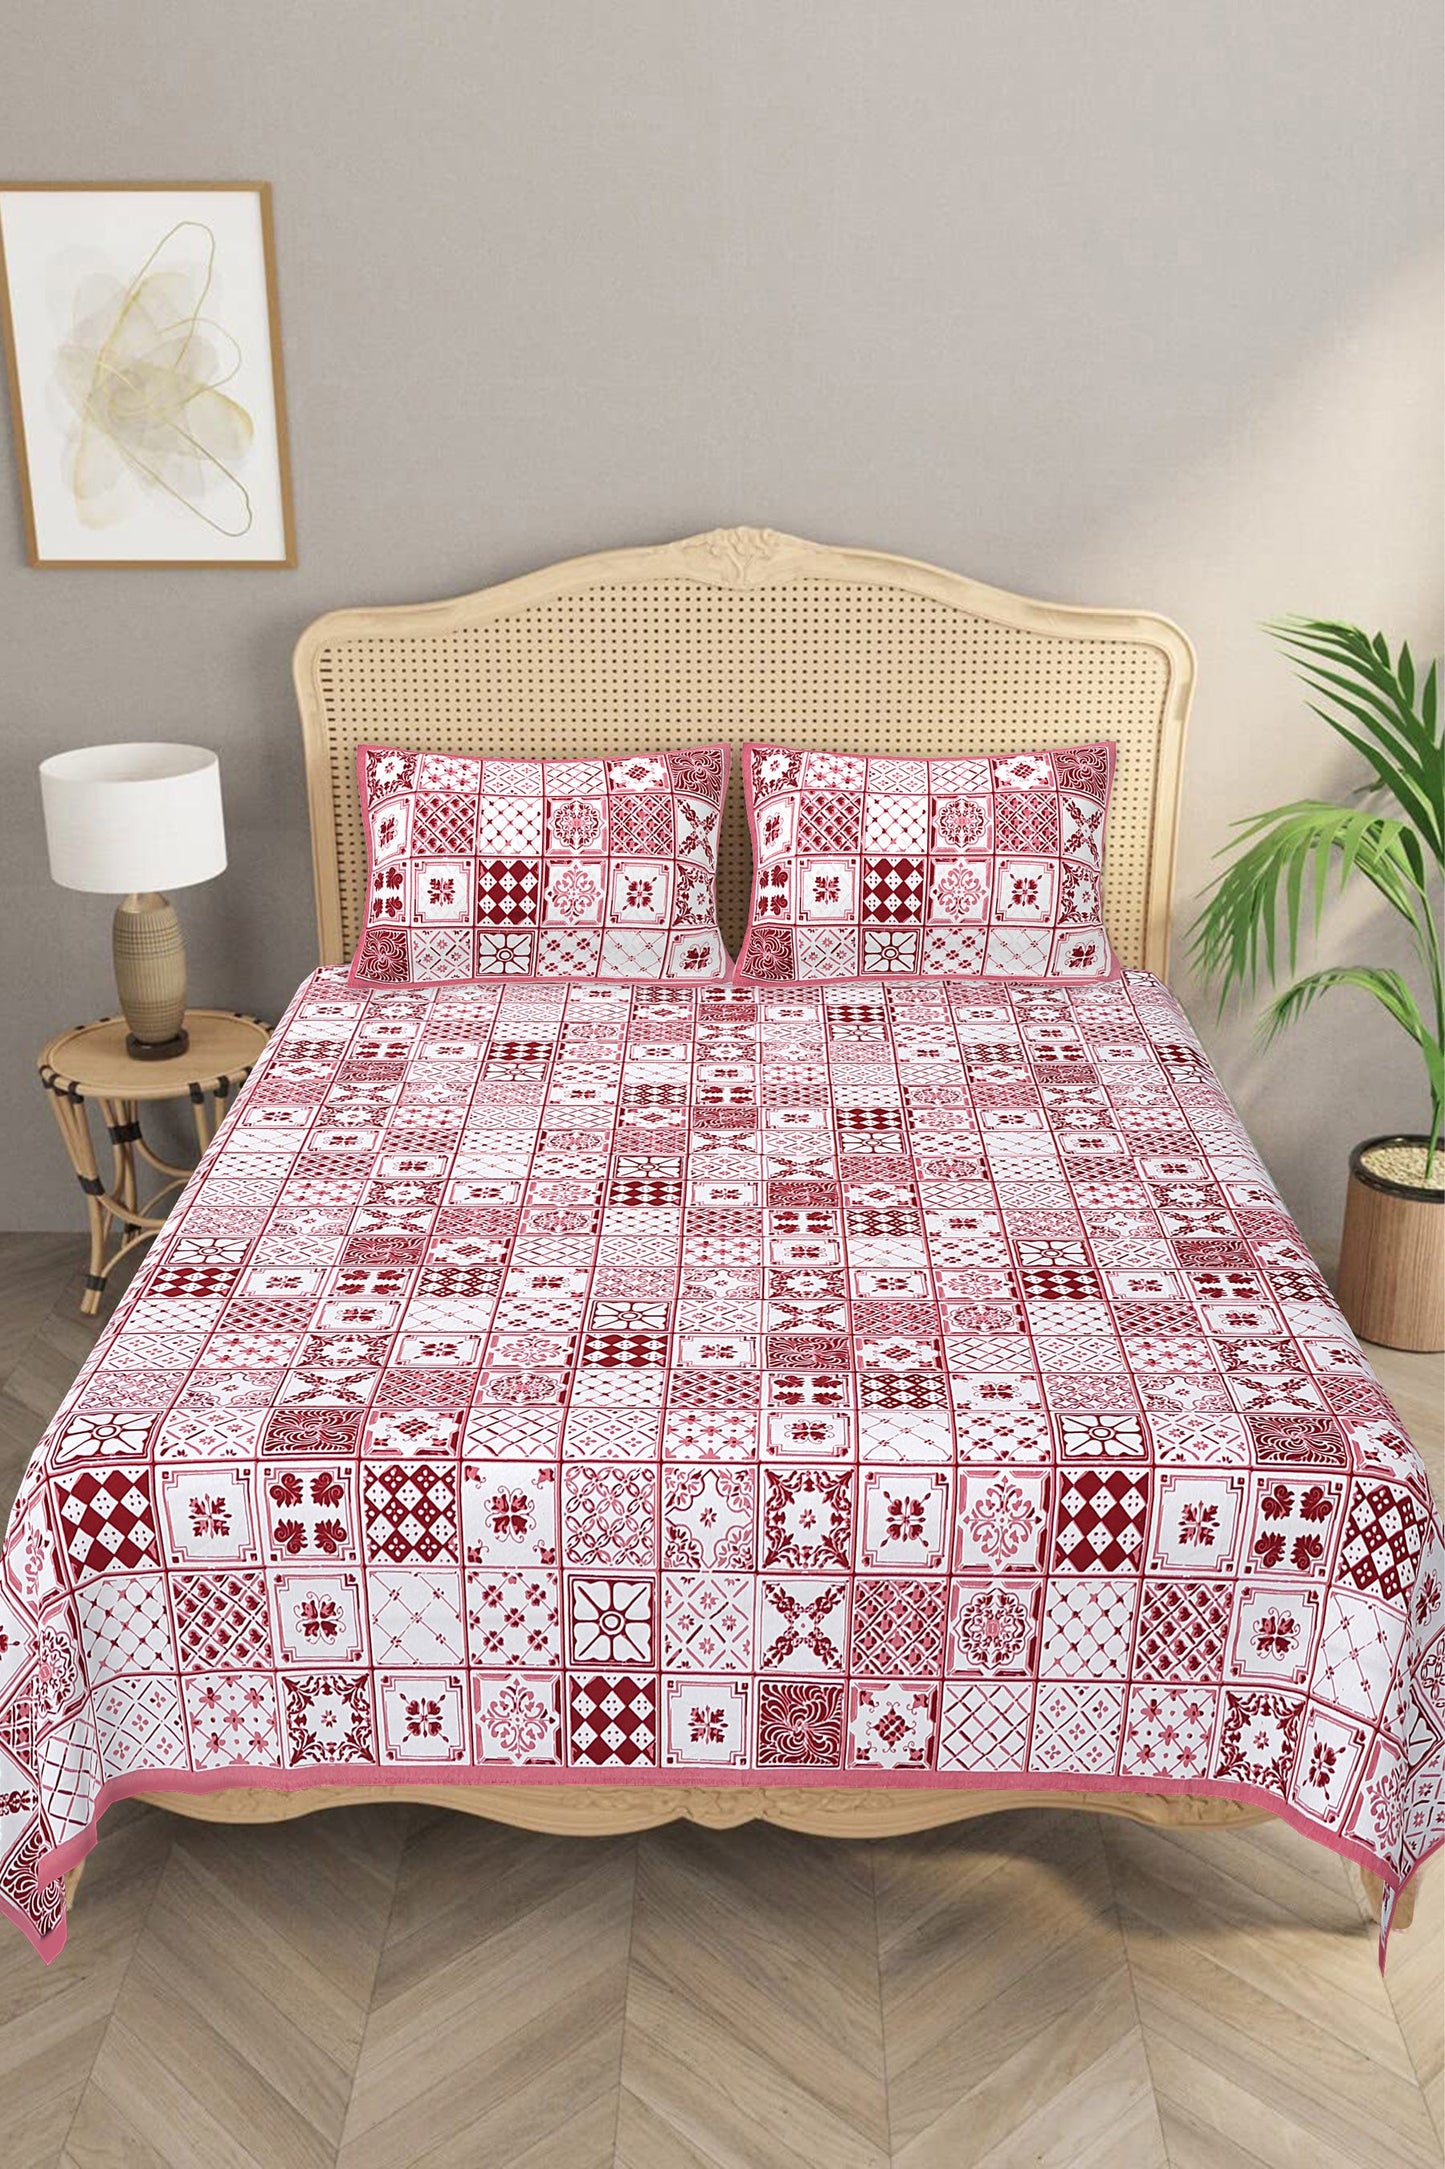 Beautifully Hand Crafted Moroccan Collection of Premium Sheets and Linens - Marrakesh Collection - Red Square Marikesh Double Bed Sheet with 2 Pillow Covers